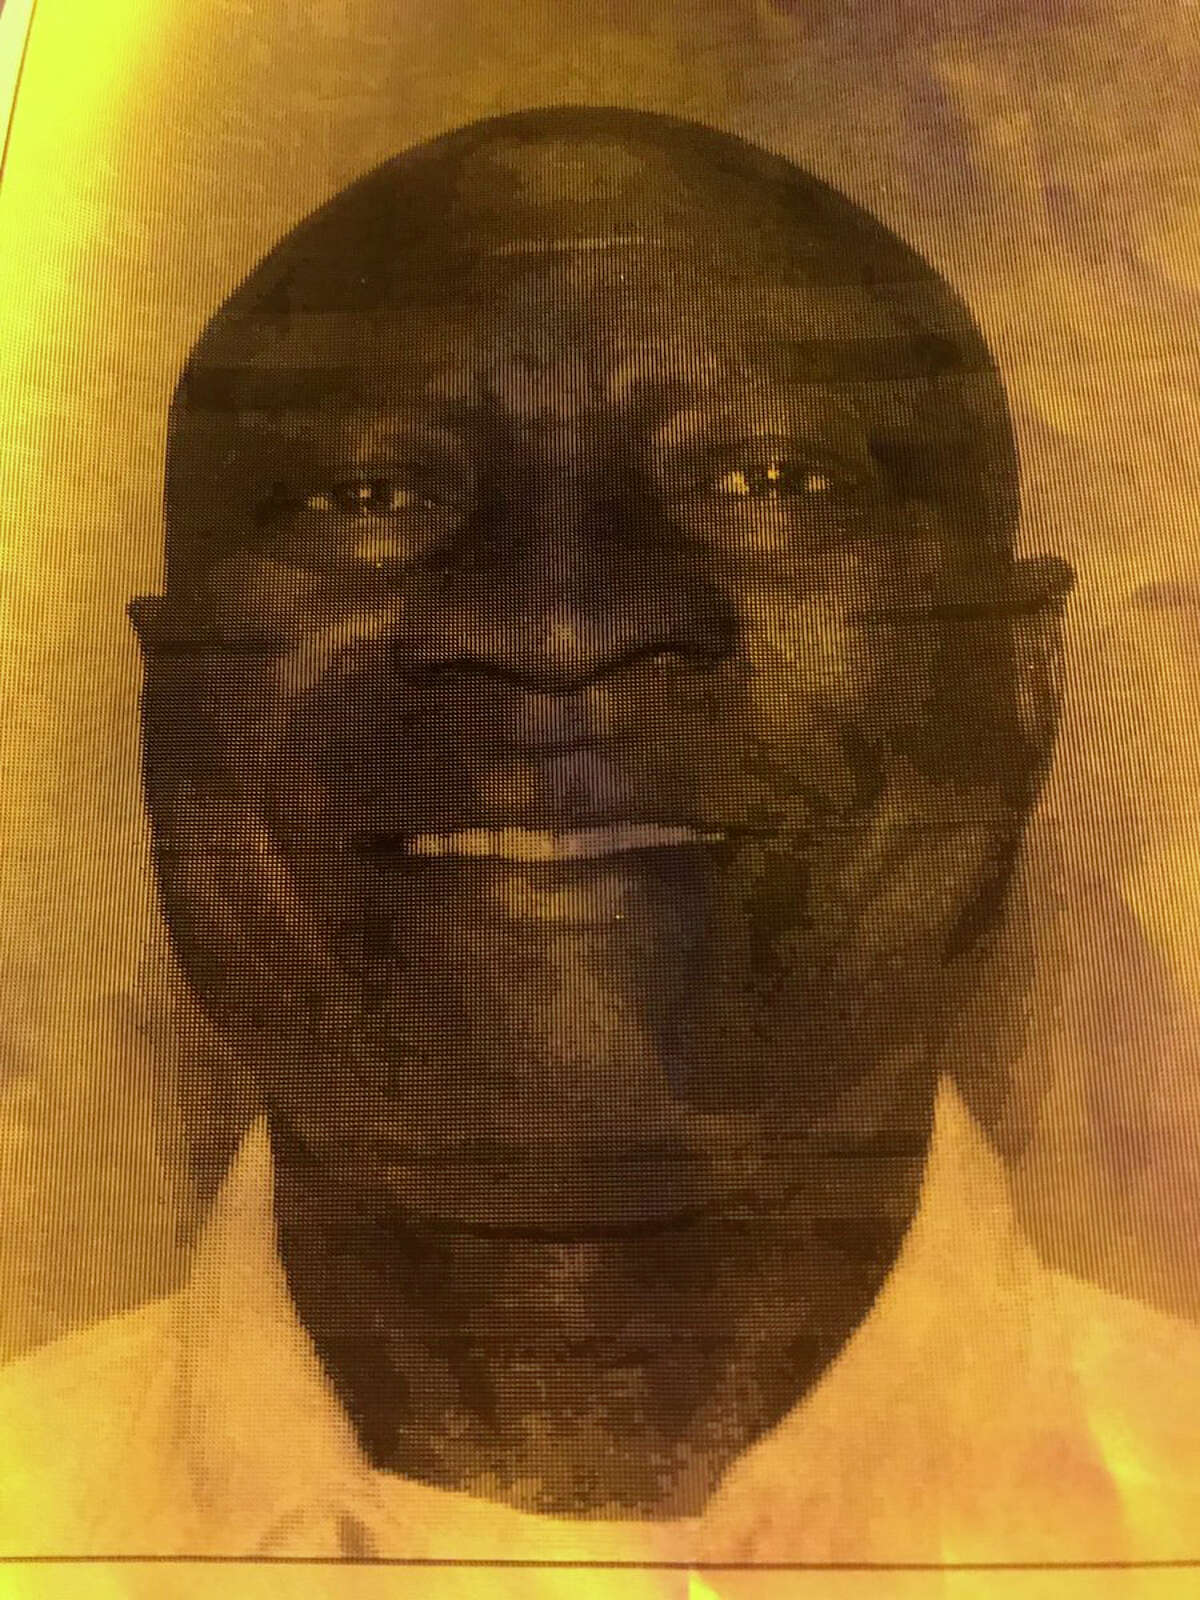 Investigators are seeking Arthur Edigin, 62, in connection with the shooting outside Christ the Redeemer Catholic Church on Huffmeister. He’s 5’4”, 144 lbs. Driving a white ‘08 Suburban with a damaged right front quarter panel.